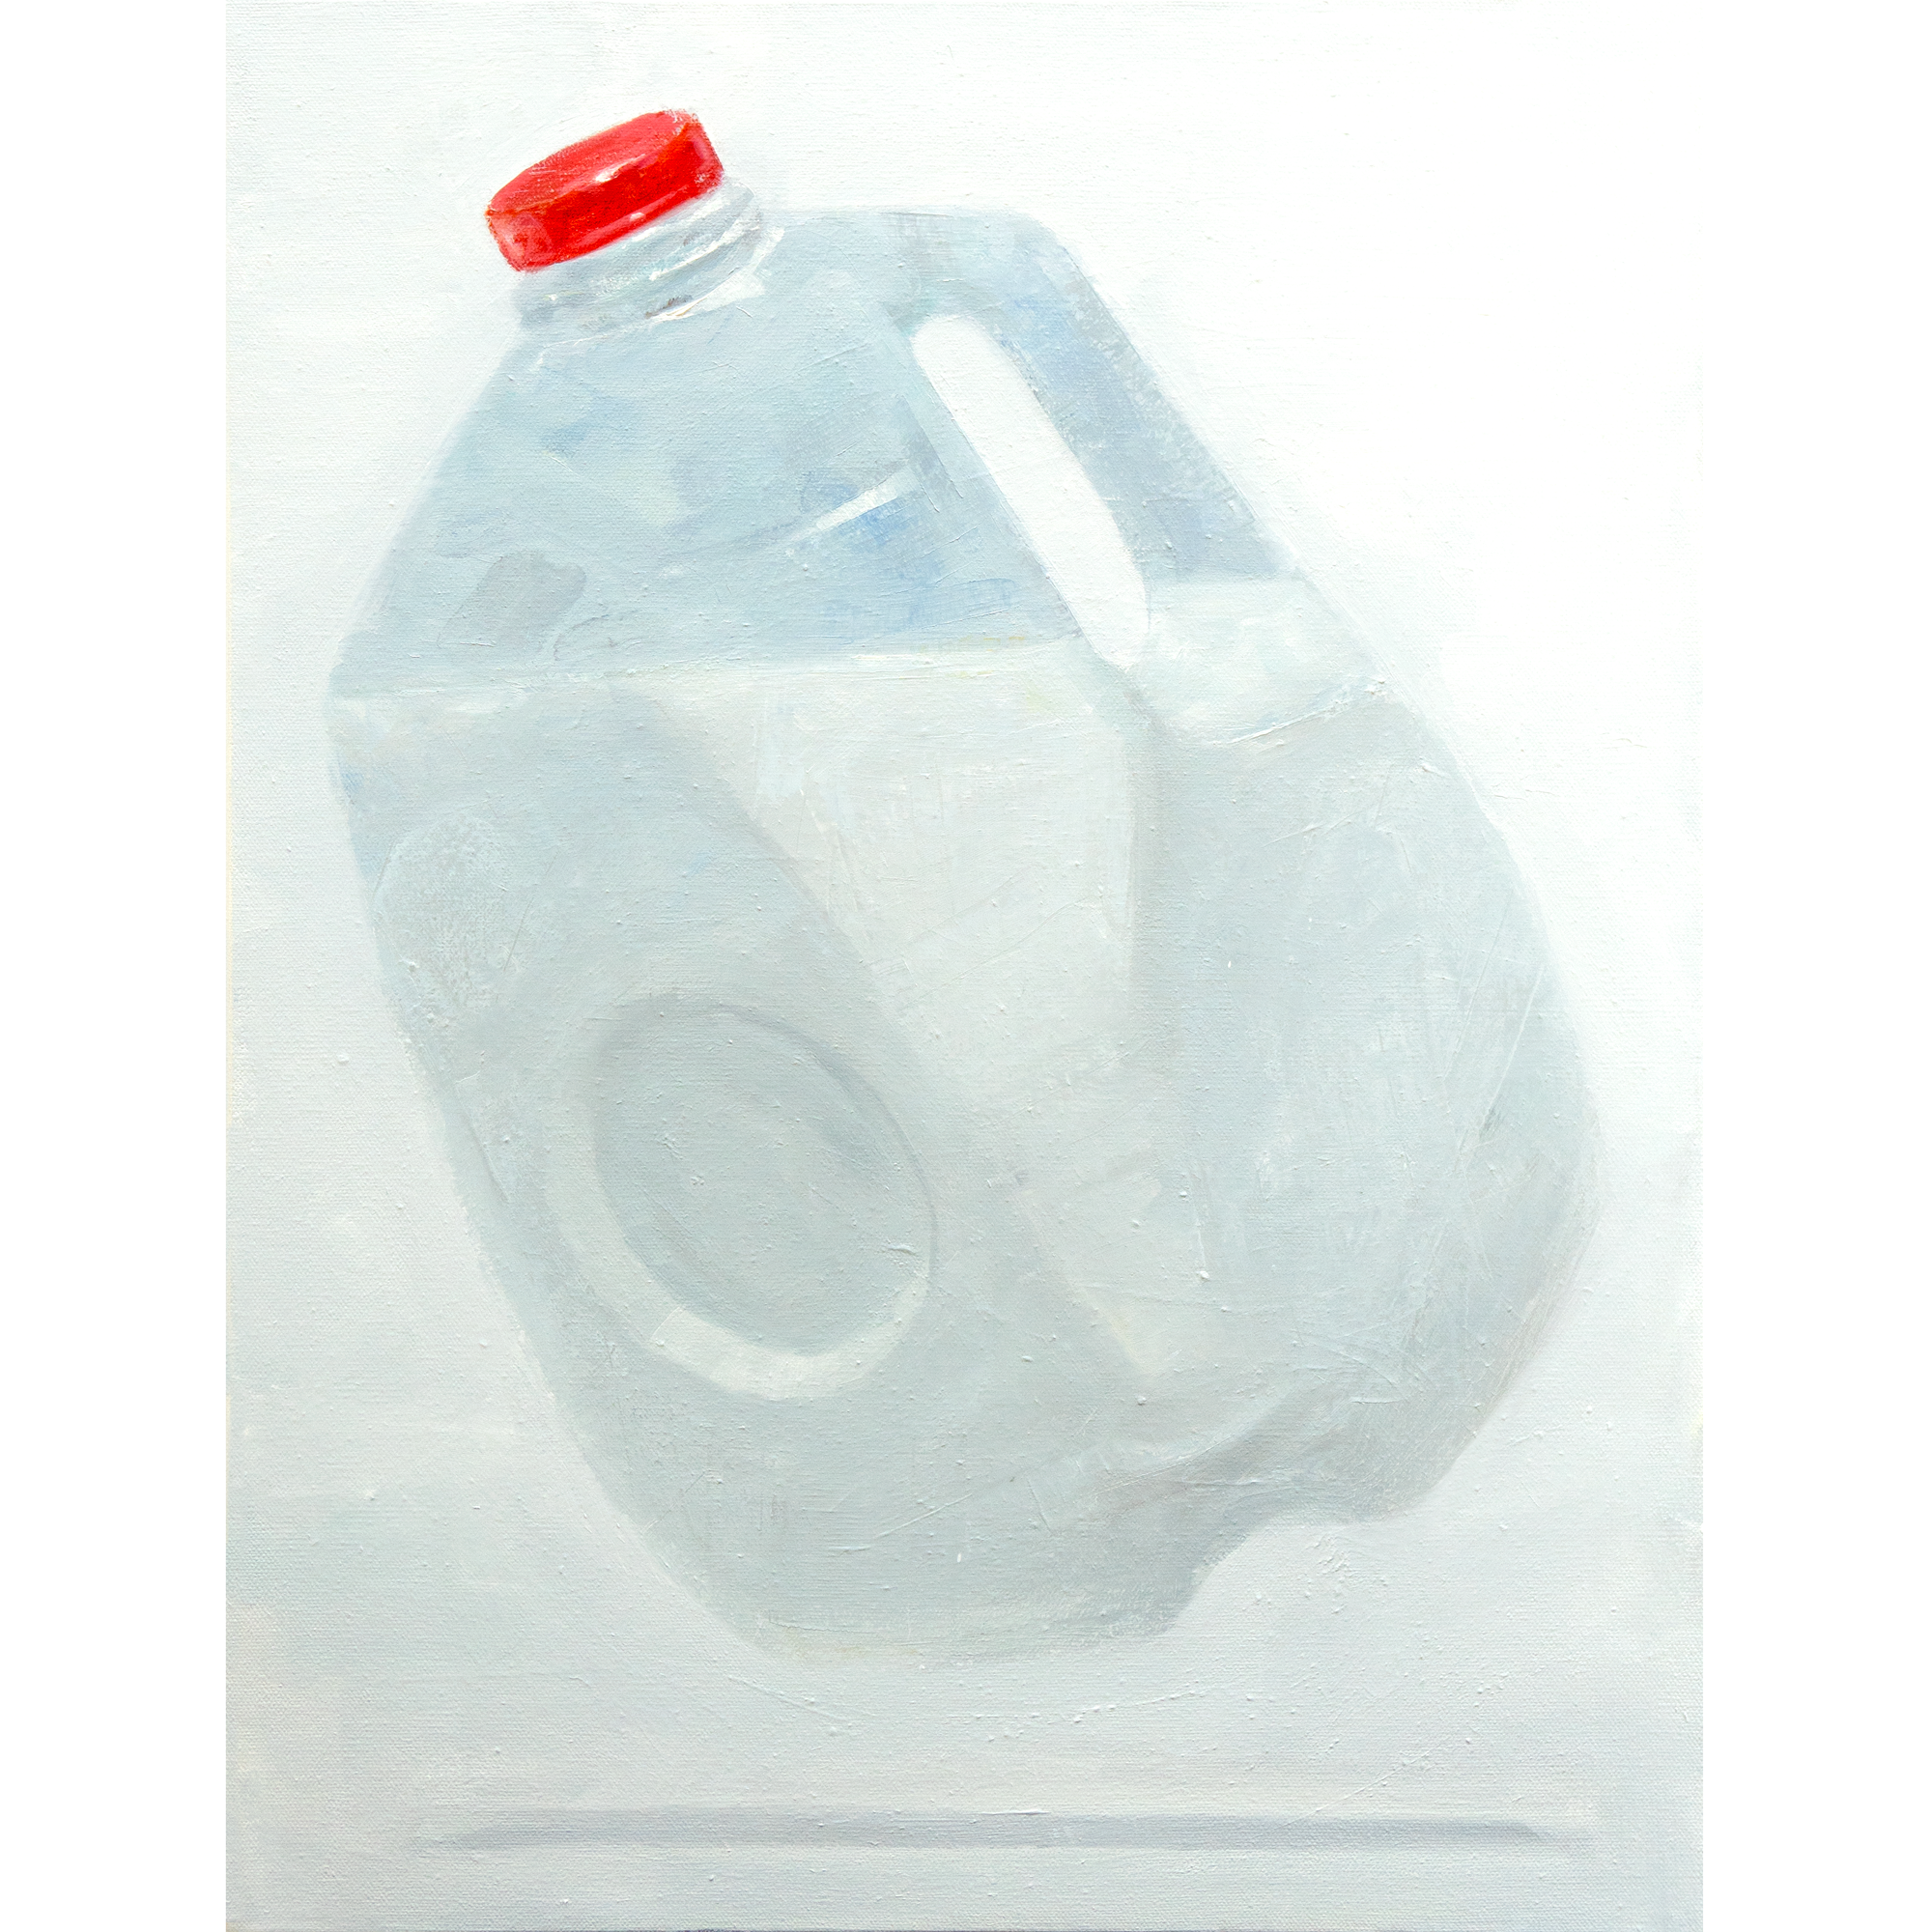 Falling Still Life with Milk by Tom Giesler